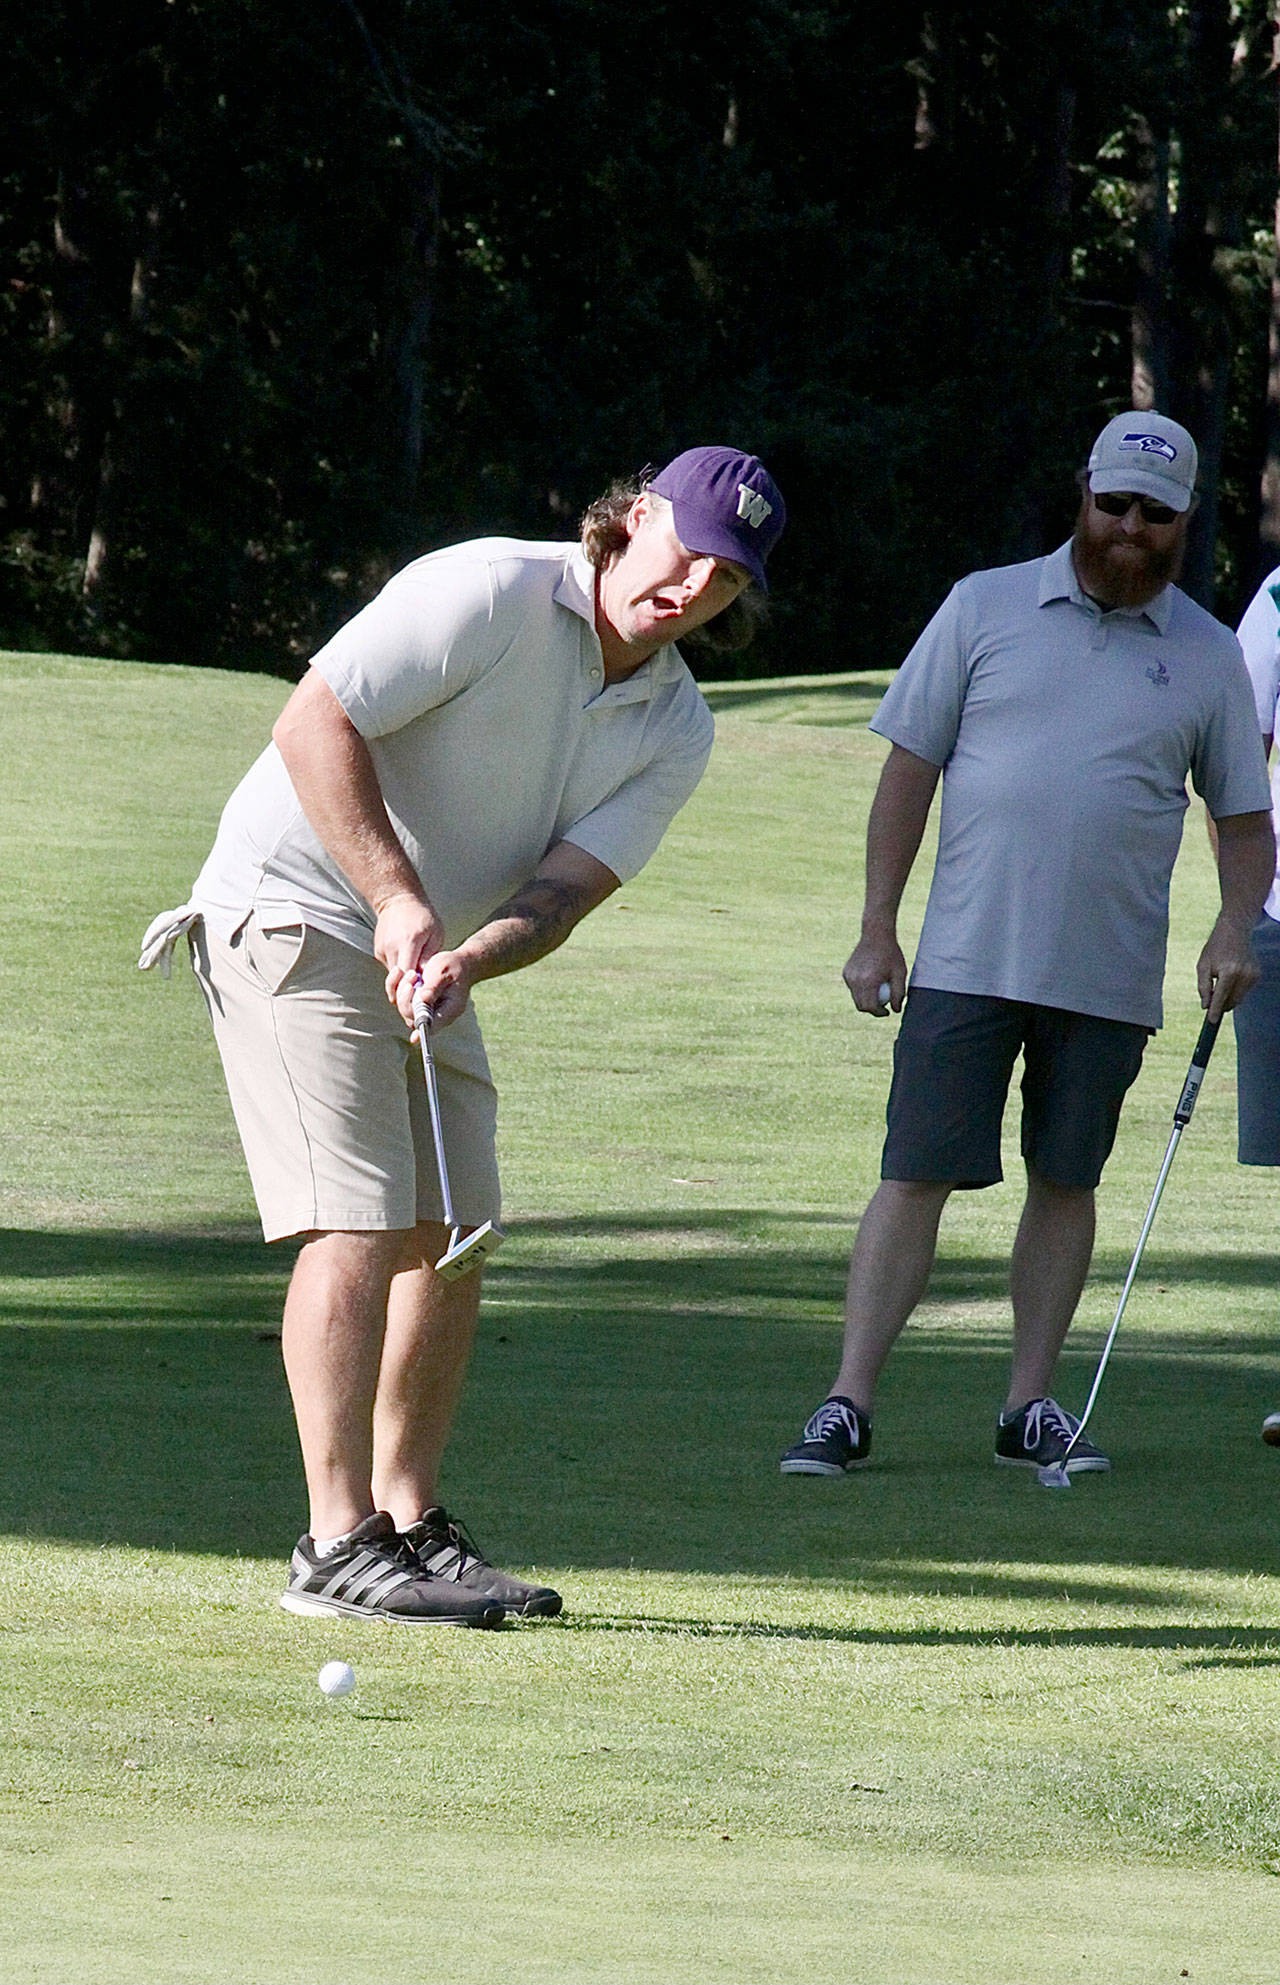 Matt Lane, a Husky baseball player from 2004-2006 and former Port Angeles Roughrider, plays in the Sonny Sixkiller Celebrity Golf Classic Friday at the Cedars at Dungeness. (Dave Logan/for Peninsula Daily News)